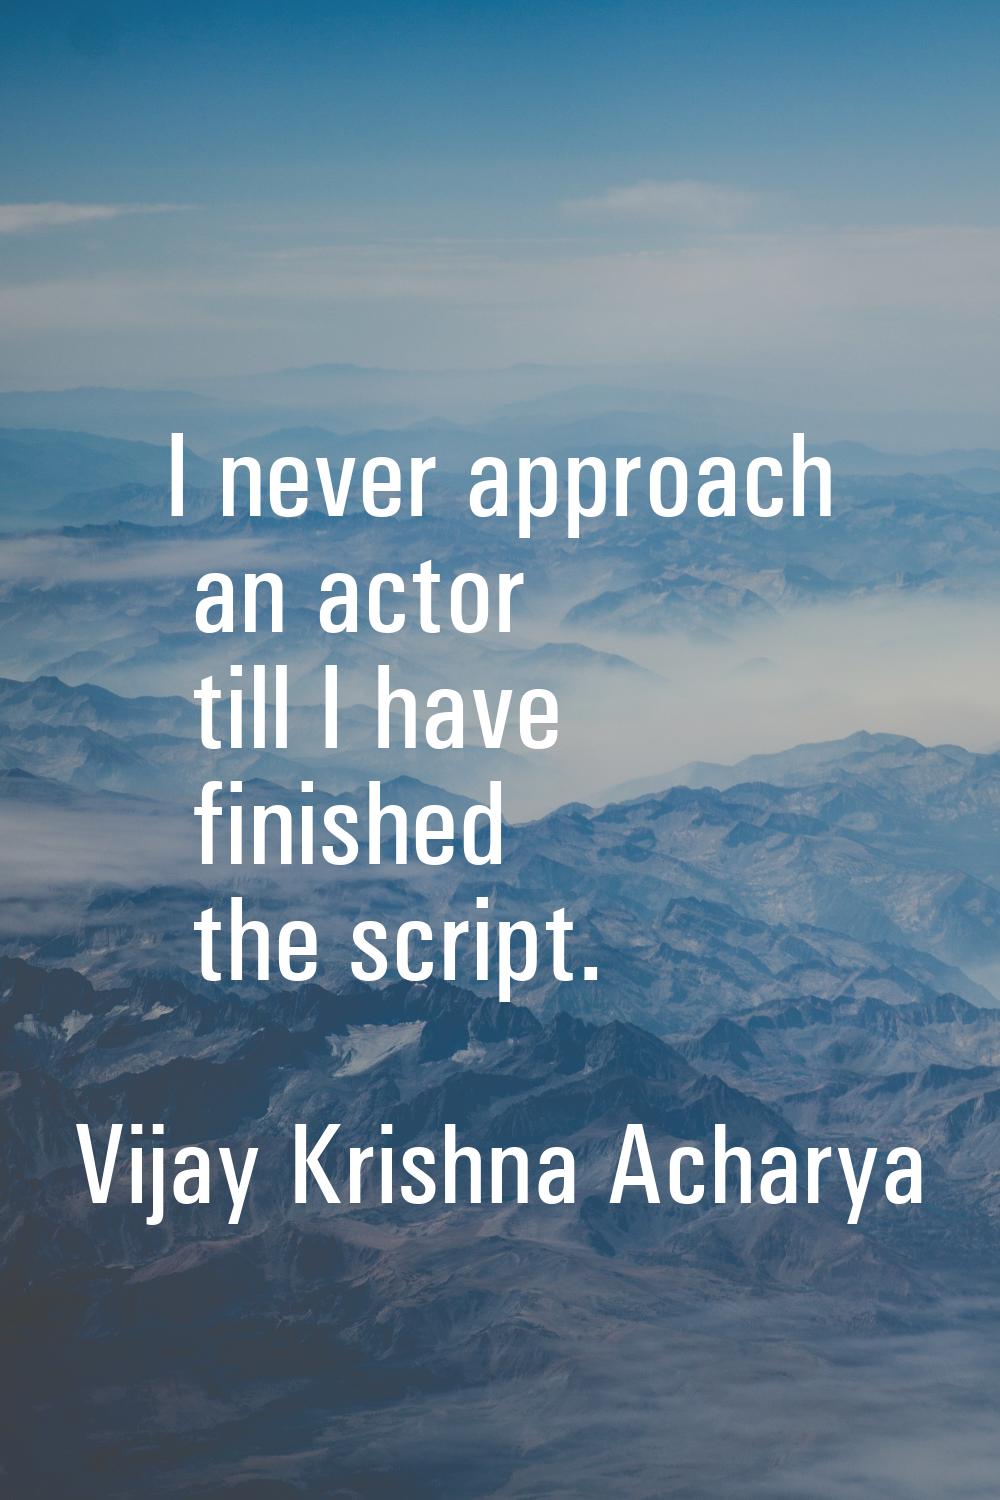 I never approach an actor till I have finished the script.